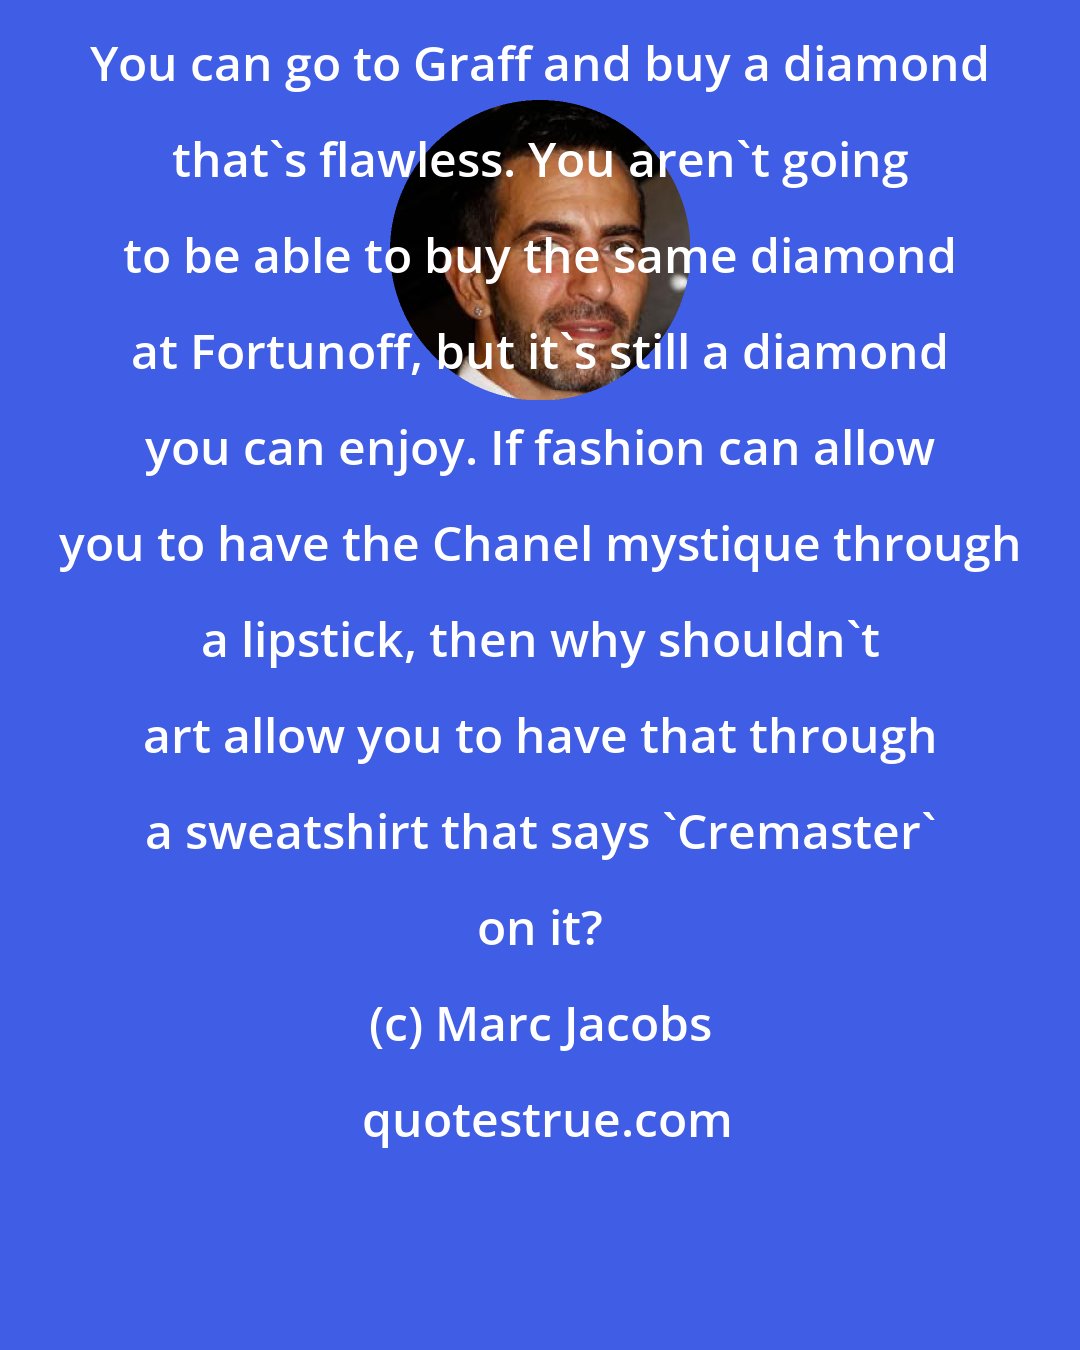 Marc Jacobs: You can go to Graff and buy a diamond that's flawless. You aren't going to be able to buy the same diamond at Fortunoff, but it's still a diamond you can enjoy. If fashion can allow you to have the Chanel mystique through a lipstick, then why shouldn't art allow you to have that through a sweatshirt that says 'Cremaster' on it?